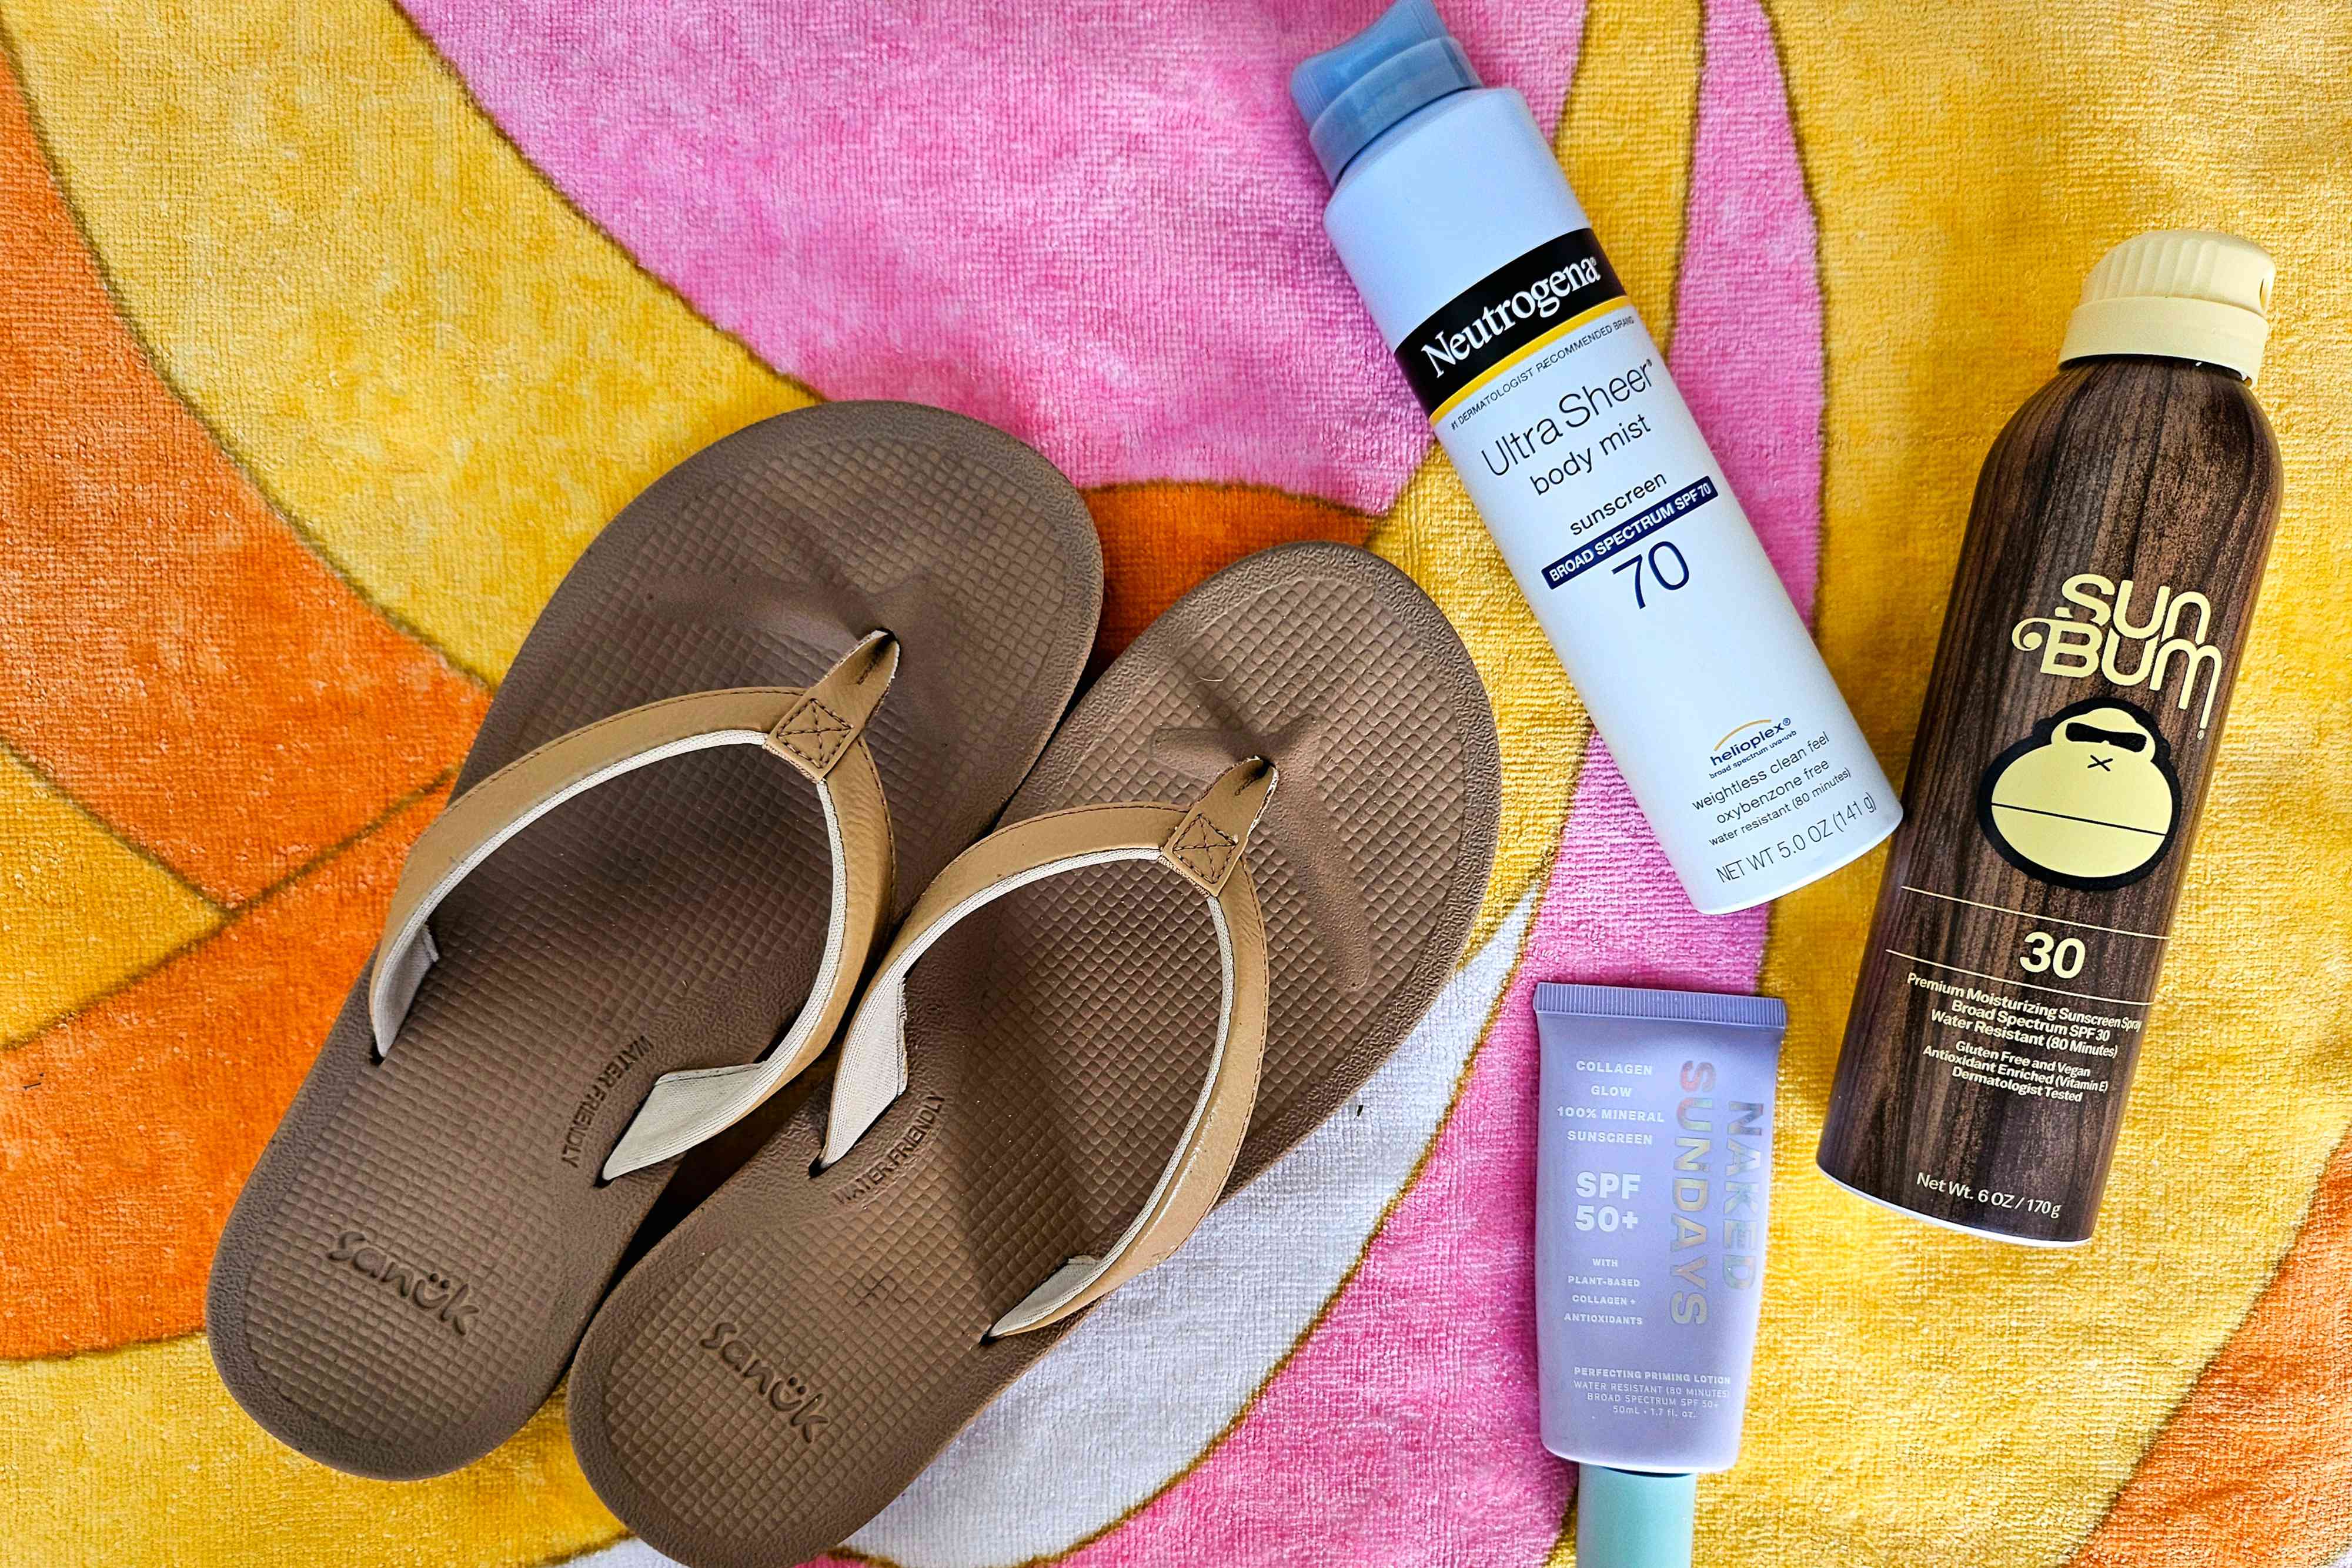 Sanuk Cosmic Shores Flip Flops next to three sunscreen products on a colorful beach towel